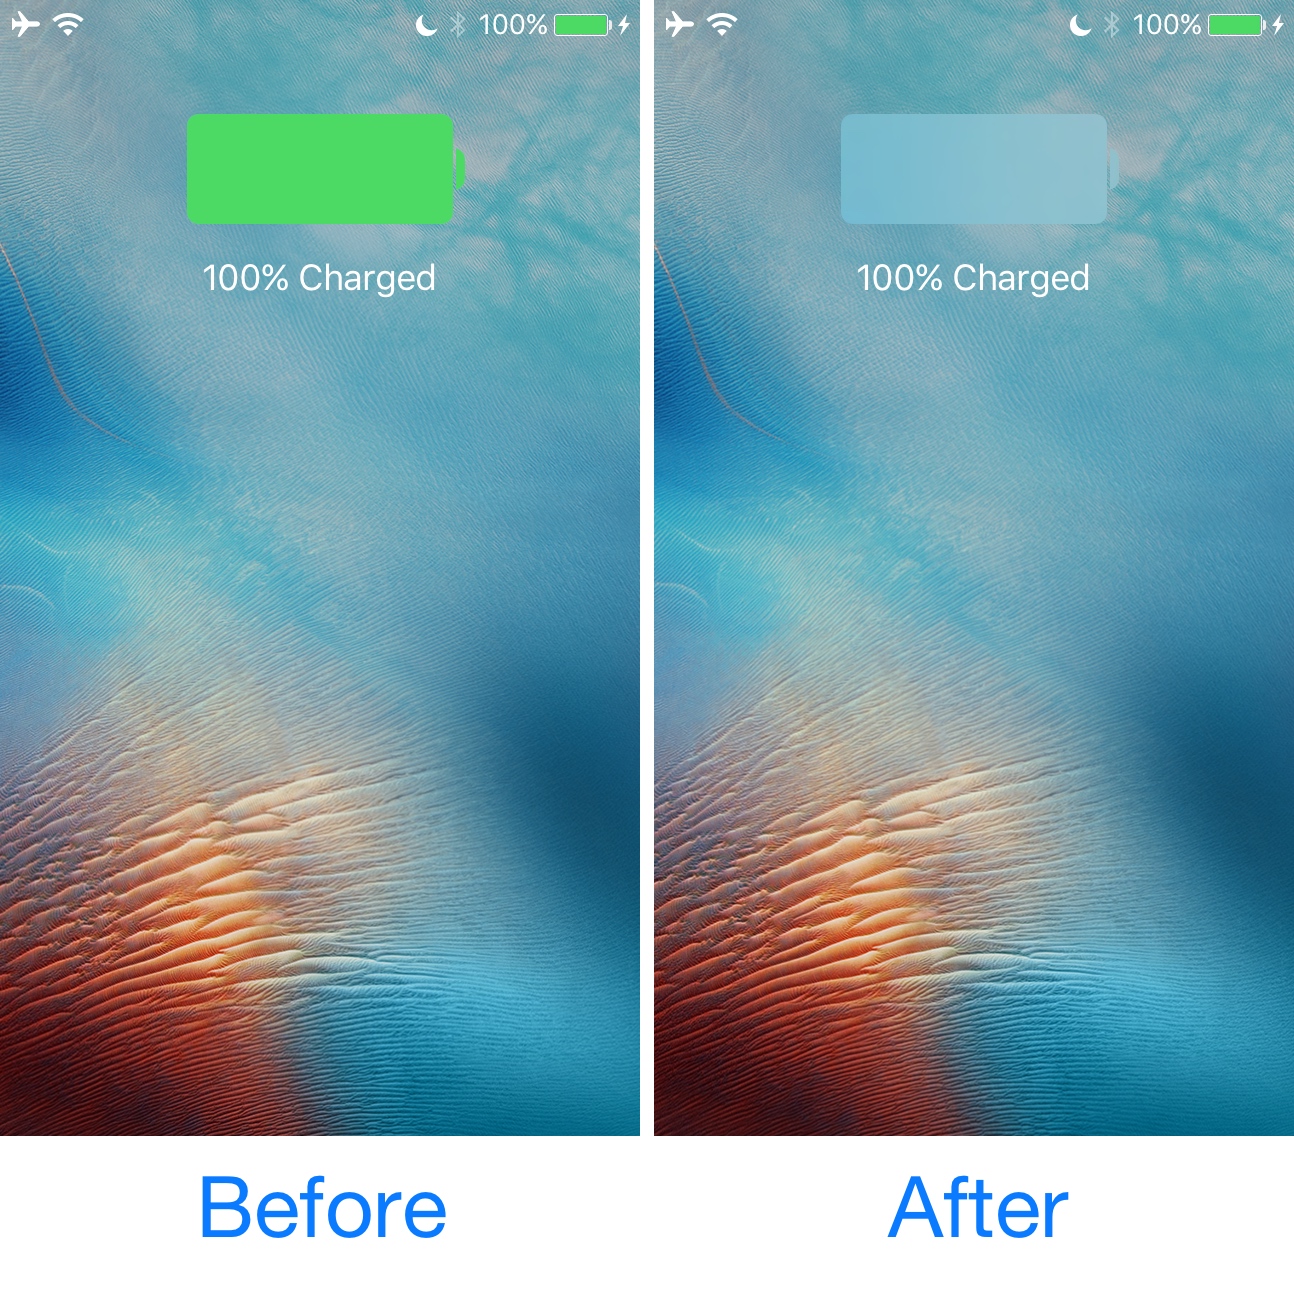 Adaptivecolorpower makes the charge screen indicator match your iphones wallpaper